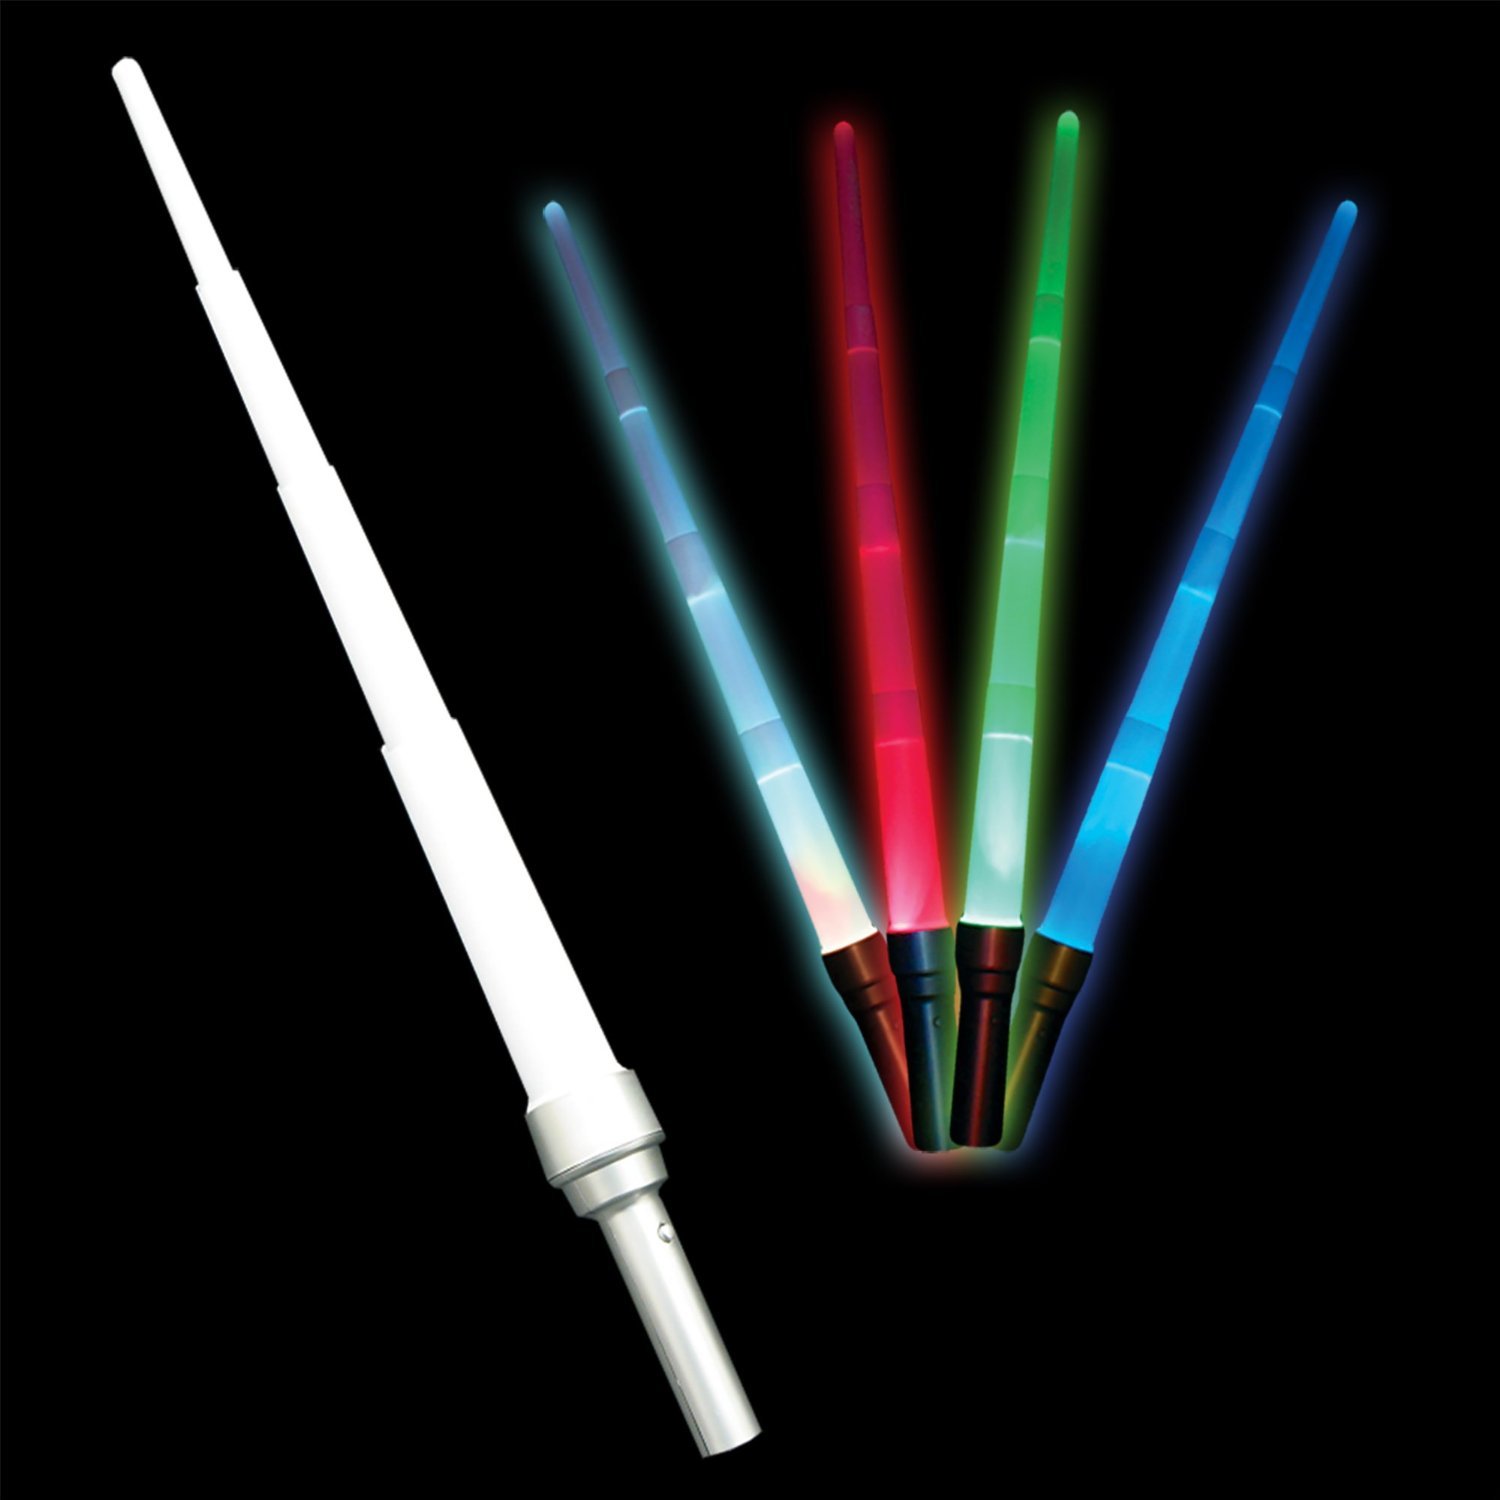 LED Assorted Colors Glow in the Dark Light Up Kids Light Sabers (12 Pack) Bulk